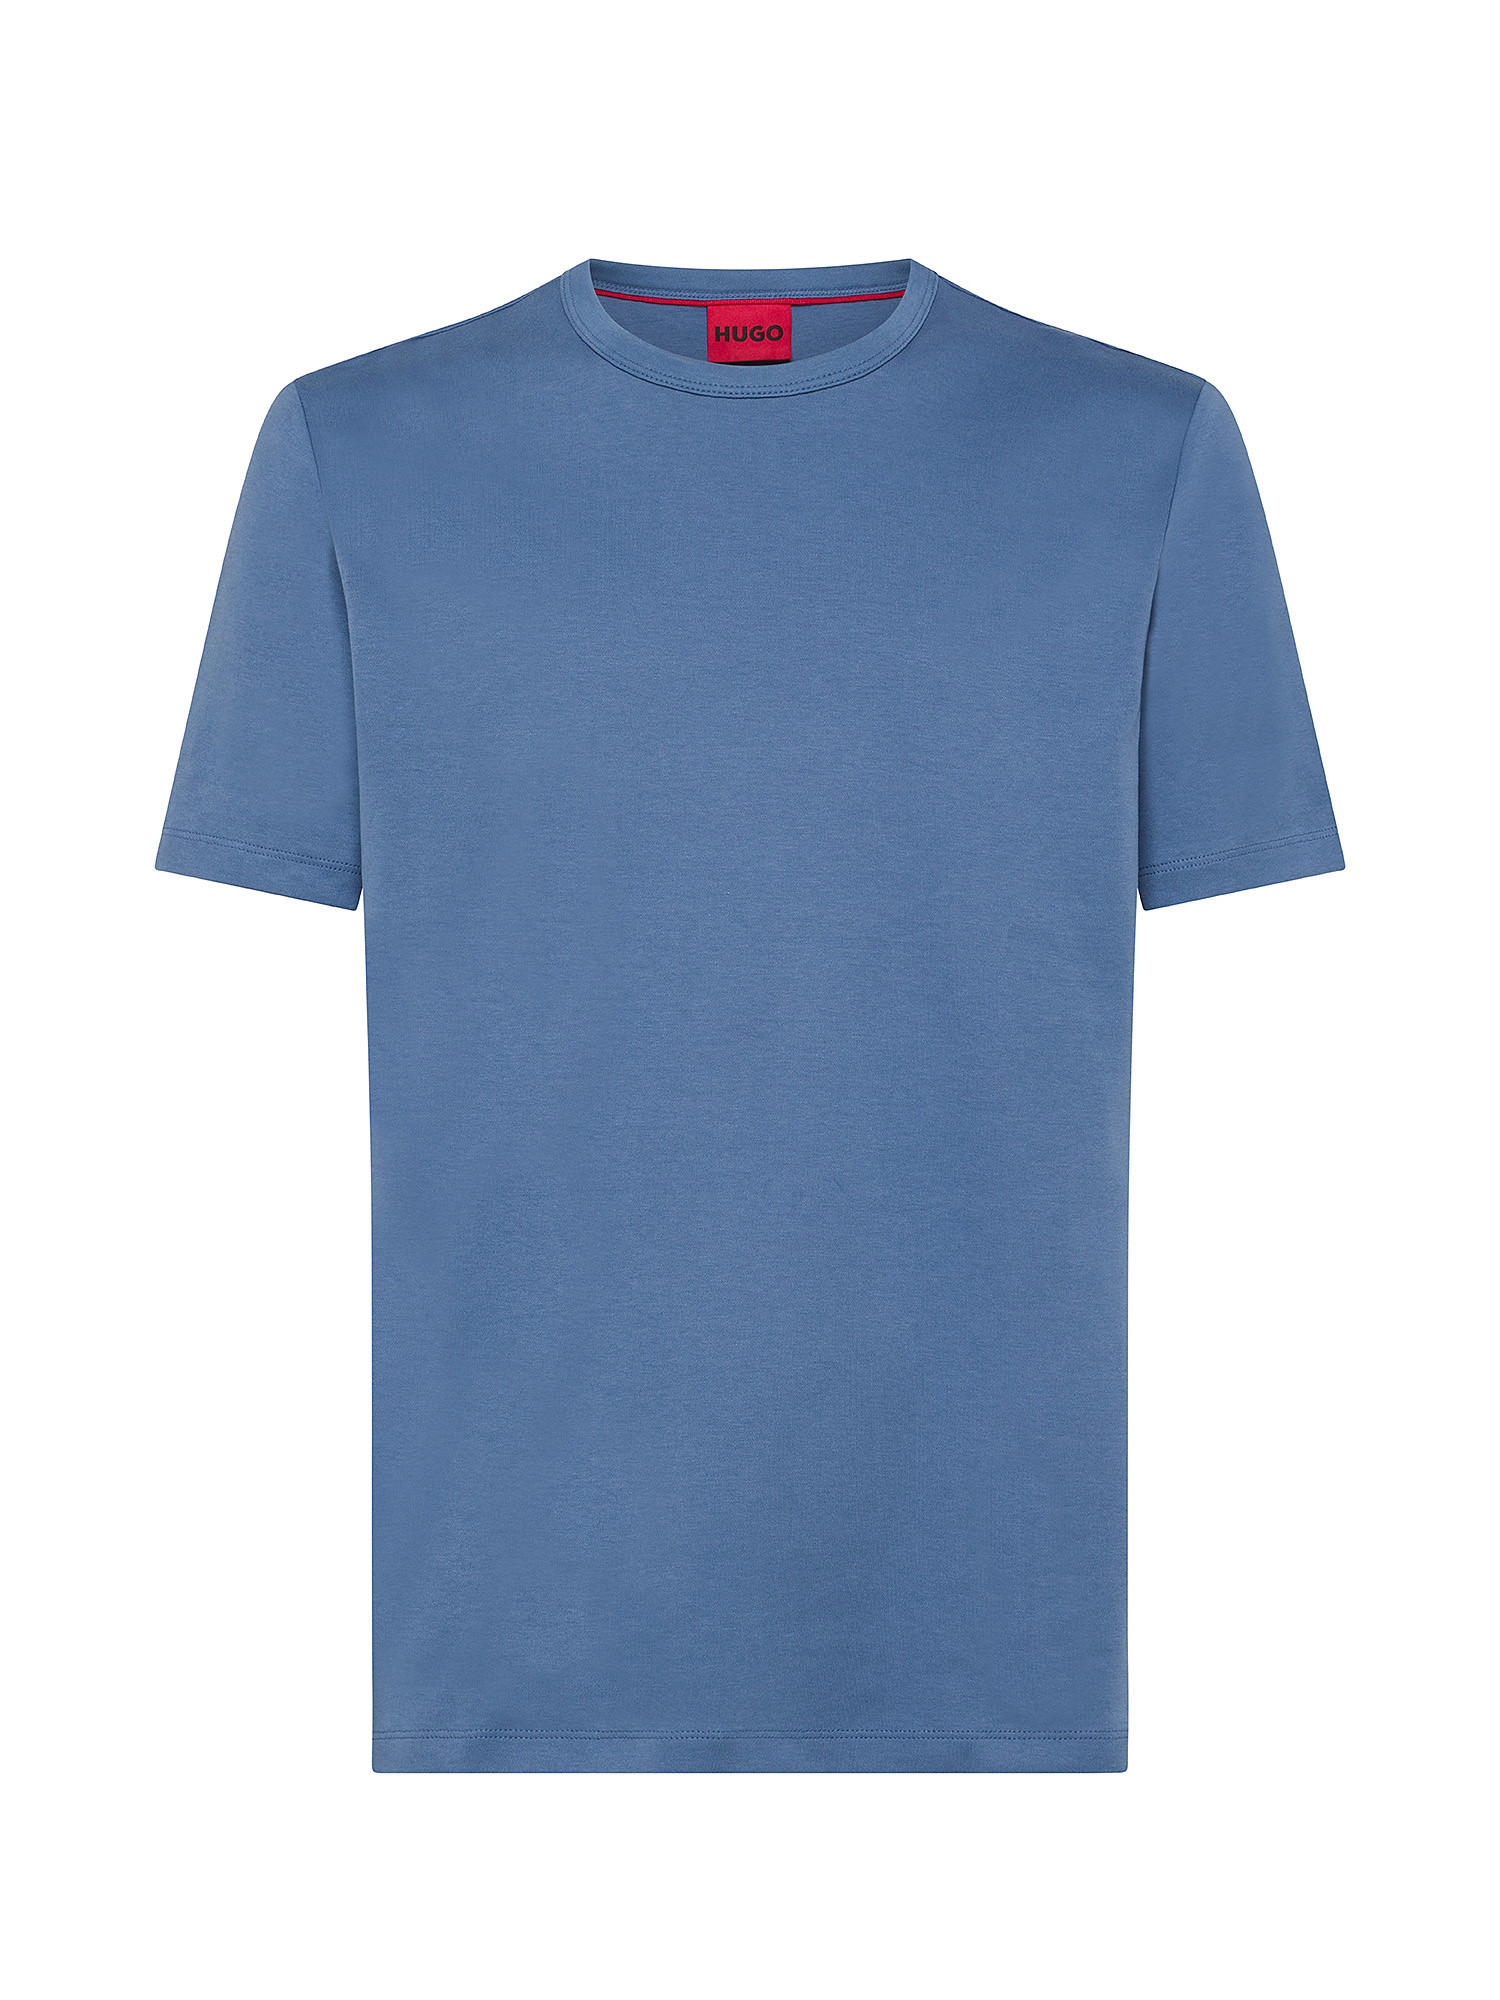 Hugo - T-shirt con stampa logo in cotone, Azzurro, large image number 0